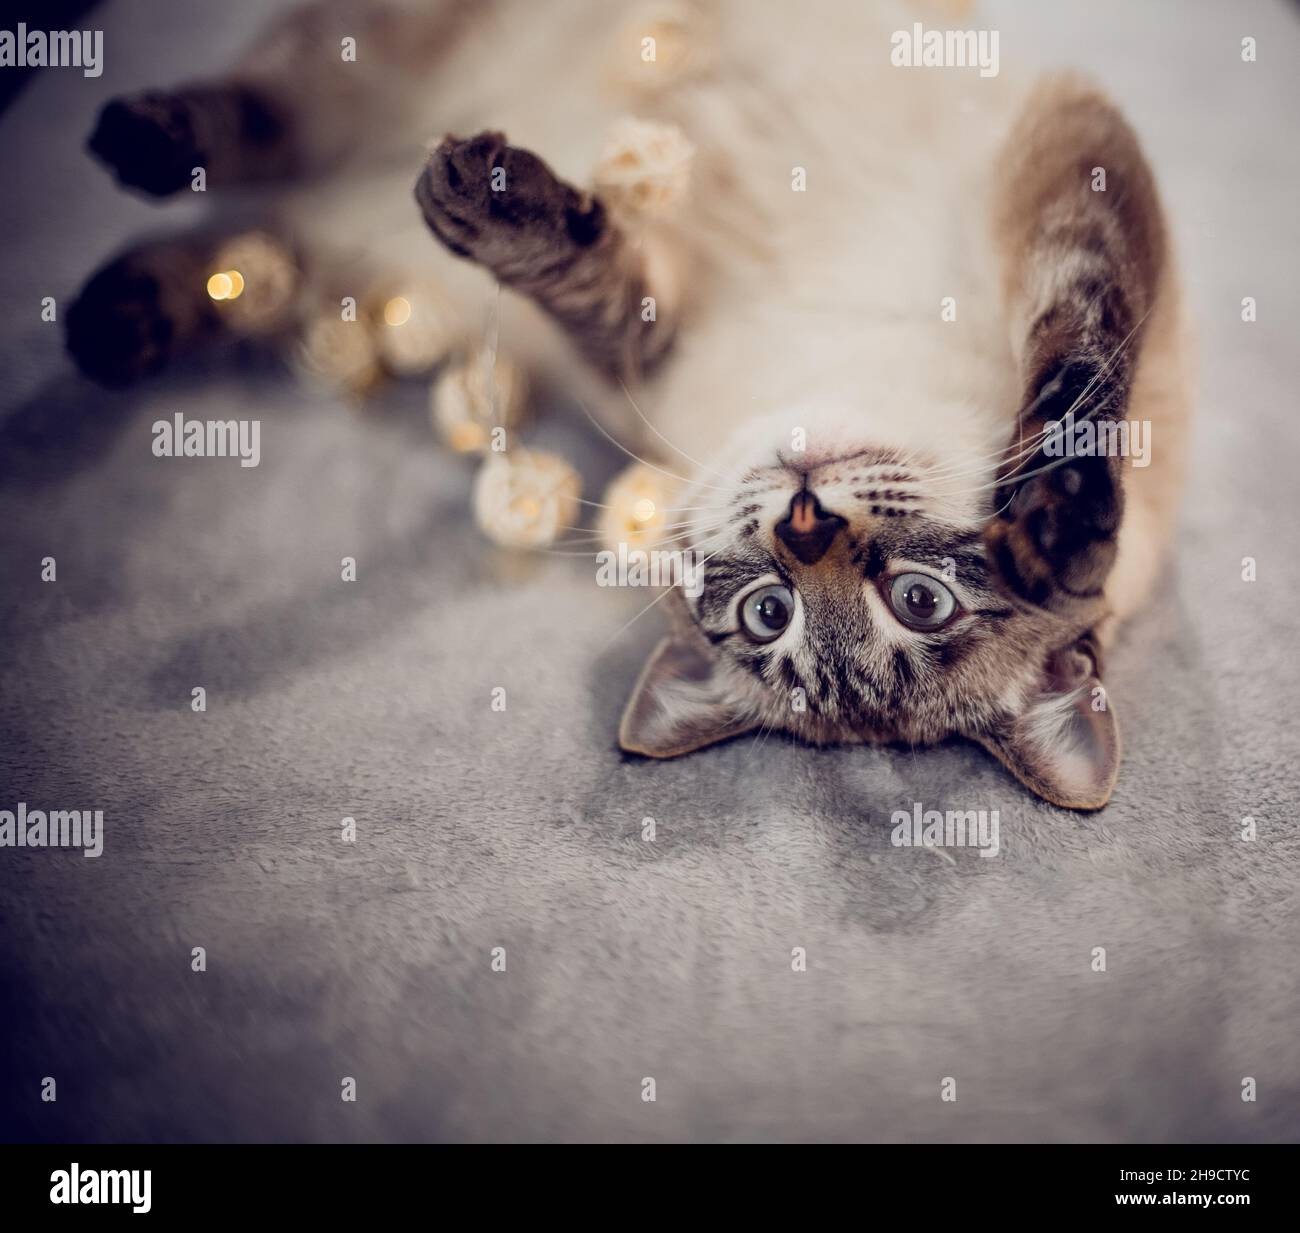 A Thai cat is lying with a Christmas garland with balls. Portrait of a Thai cat with a Christmas garland. Cat with a striped muzzle. A pet and garland Stock Photo